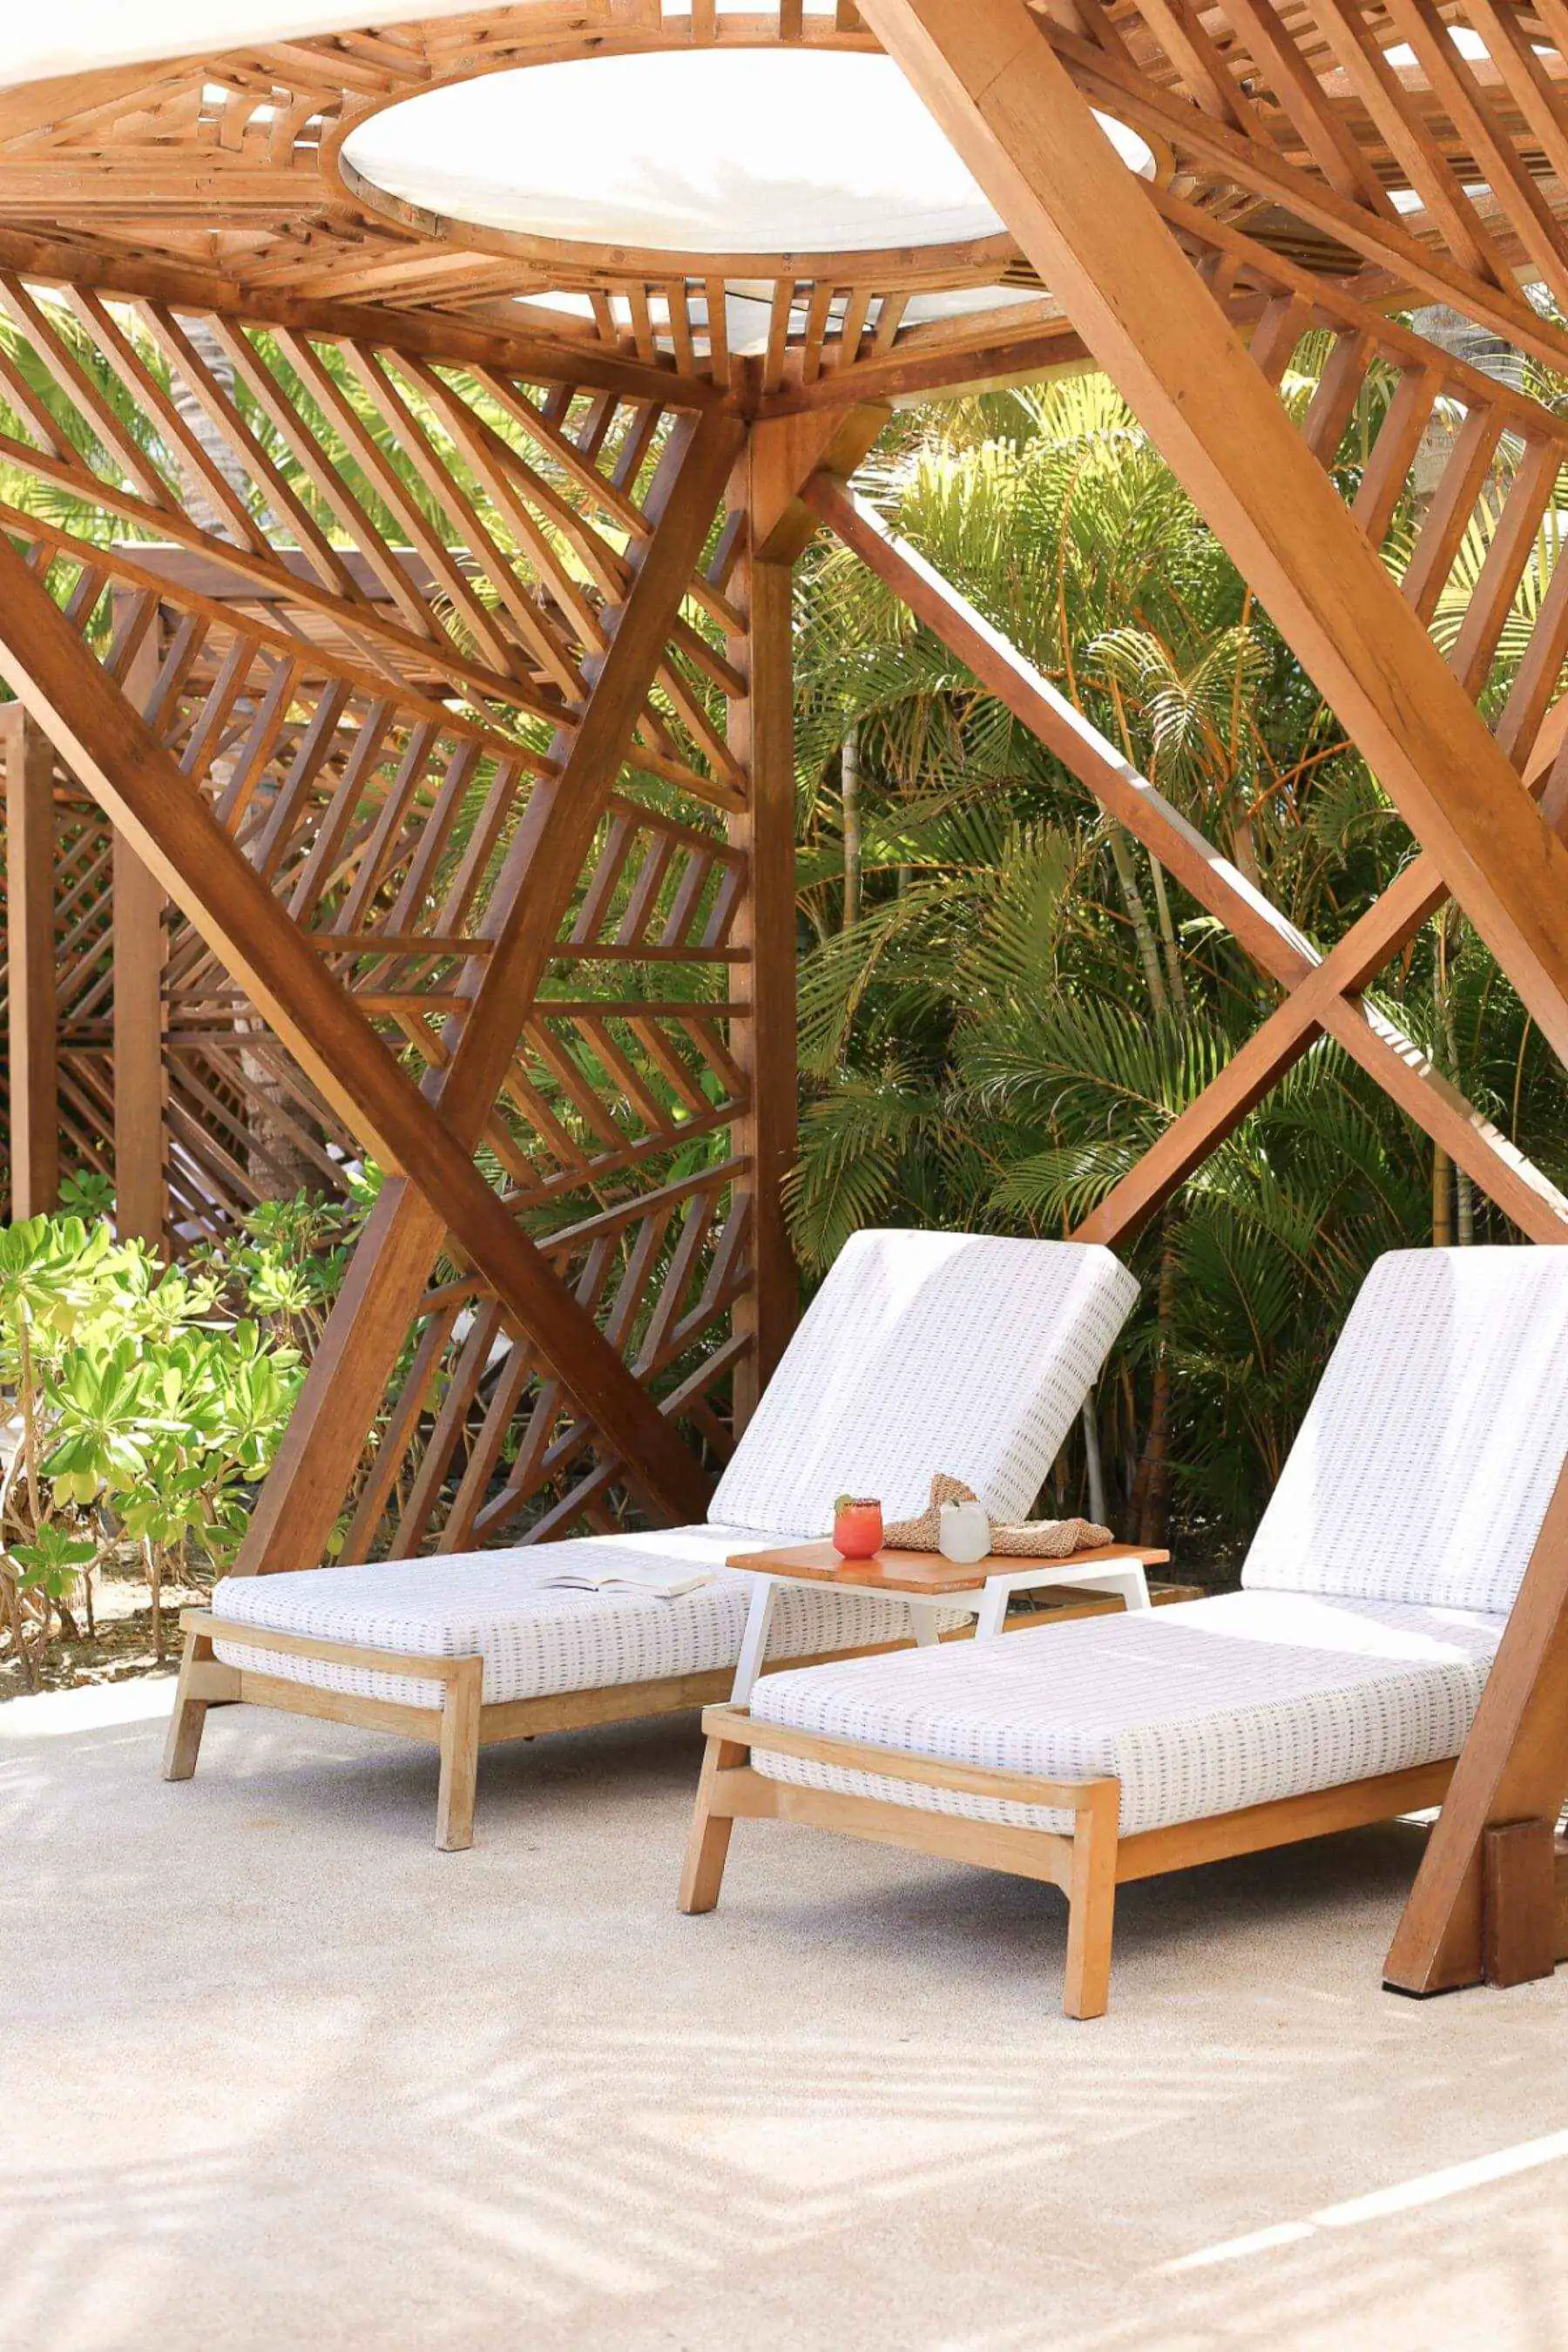 Idyllic private cabanas with white loungers